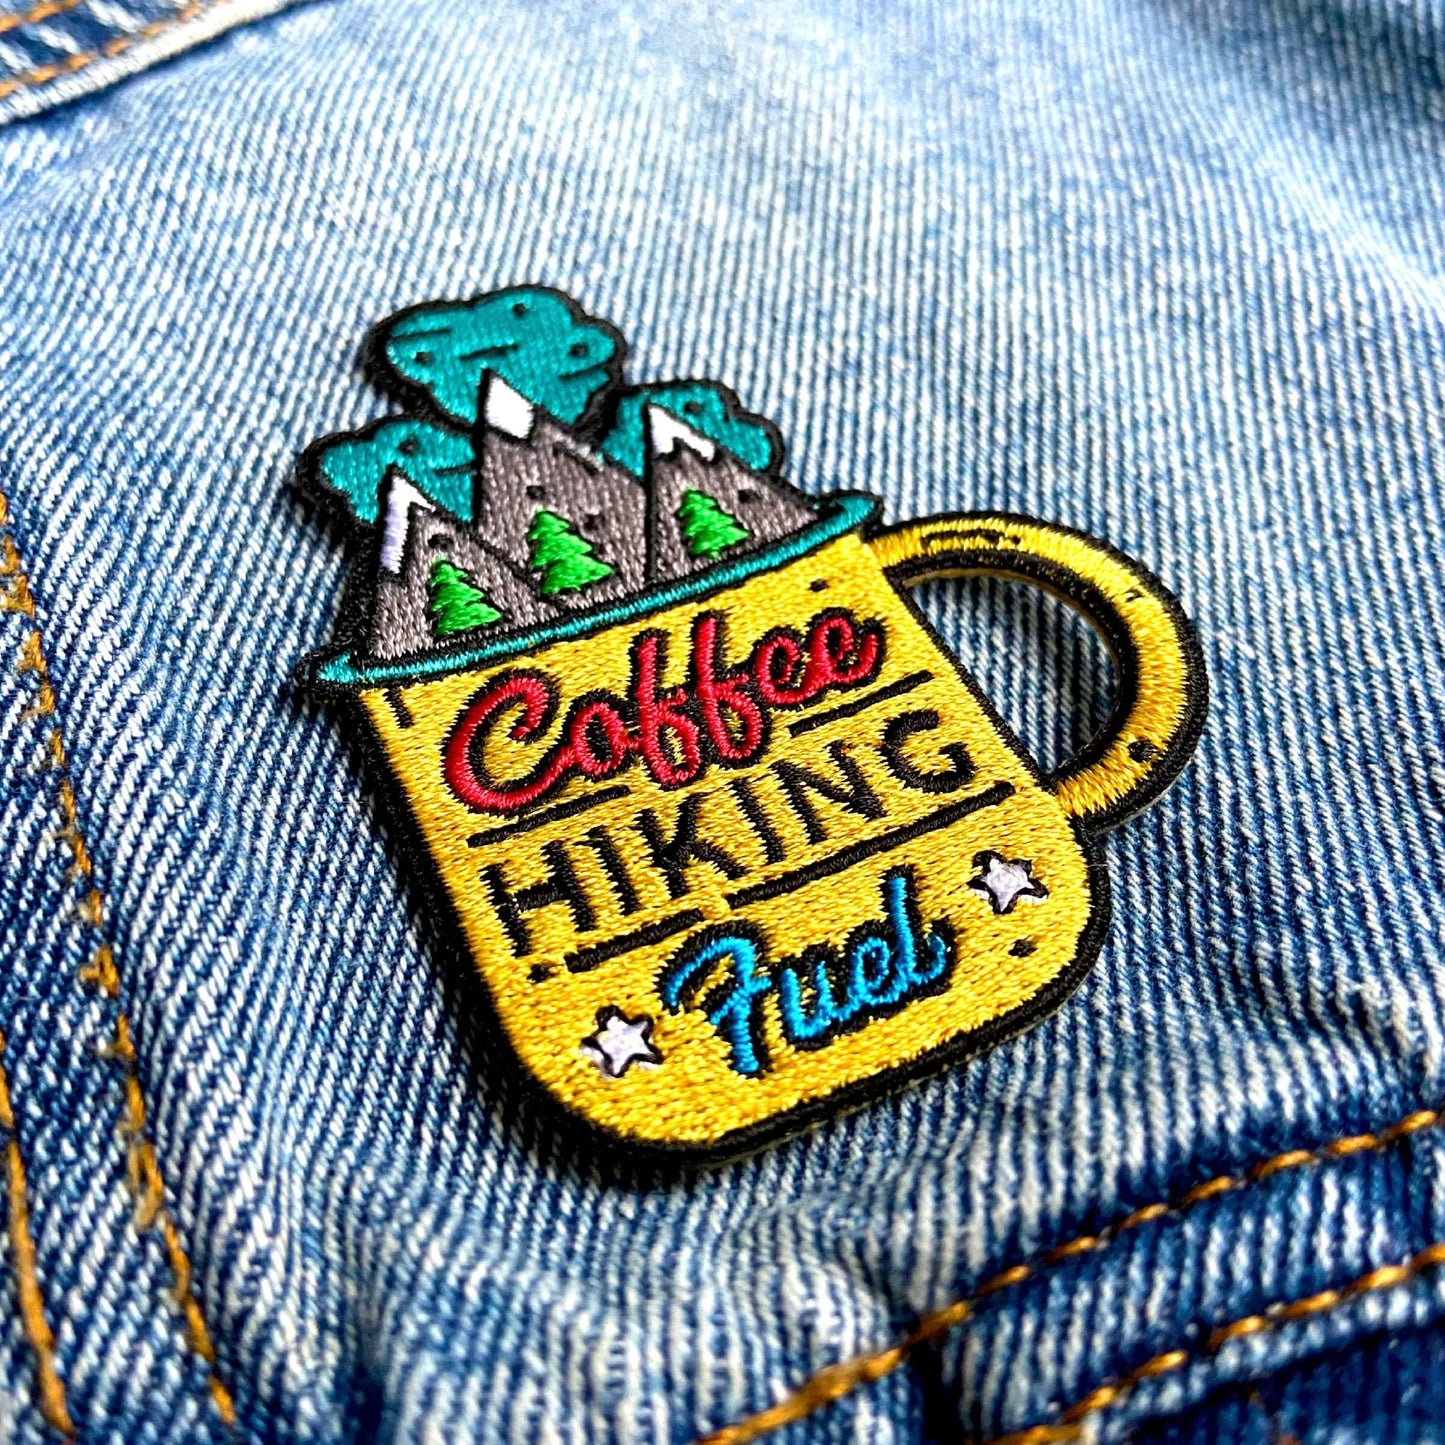 Nerd That Draws - Coffee Hiking Fuel - Iron-on Patch